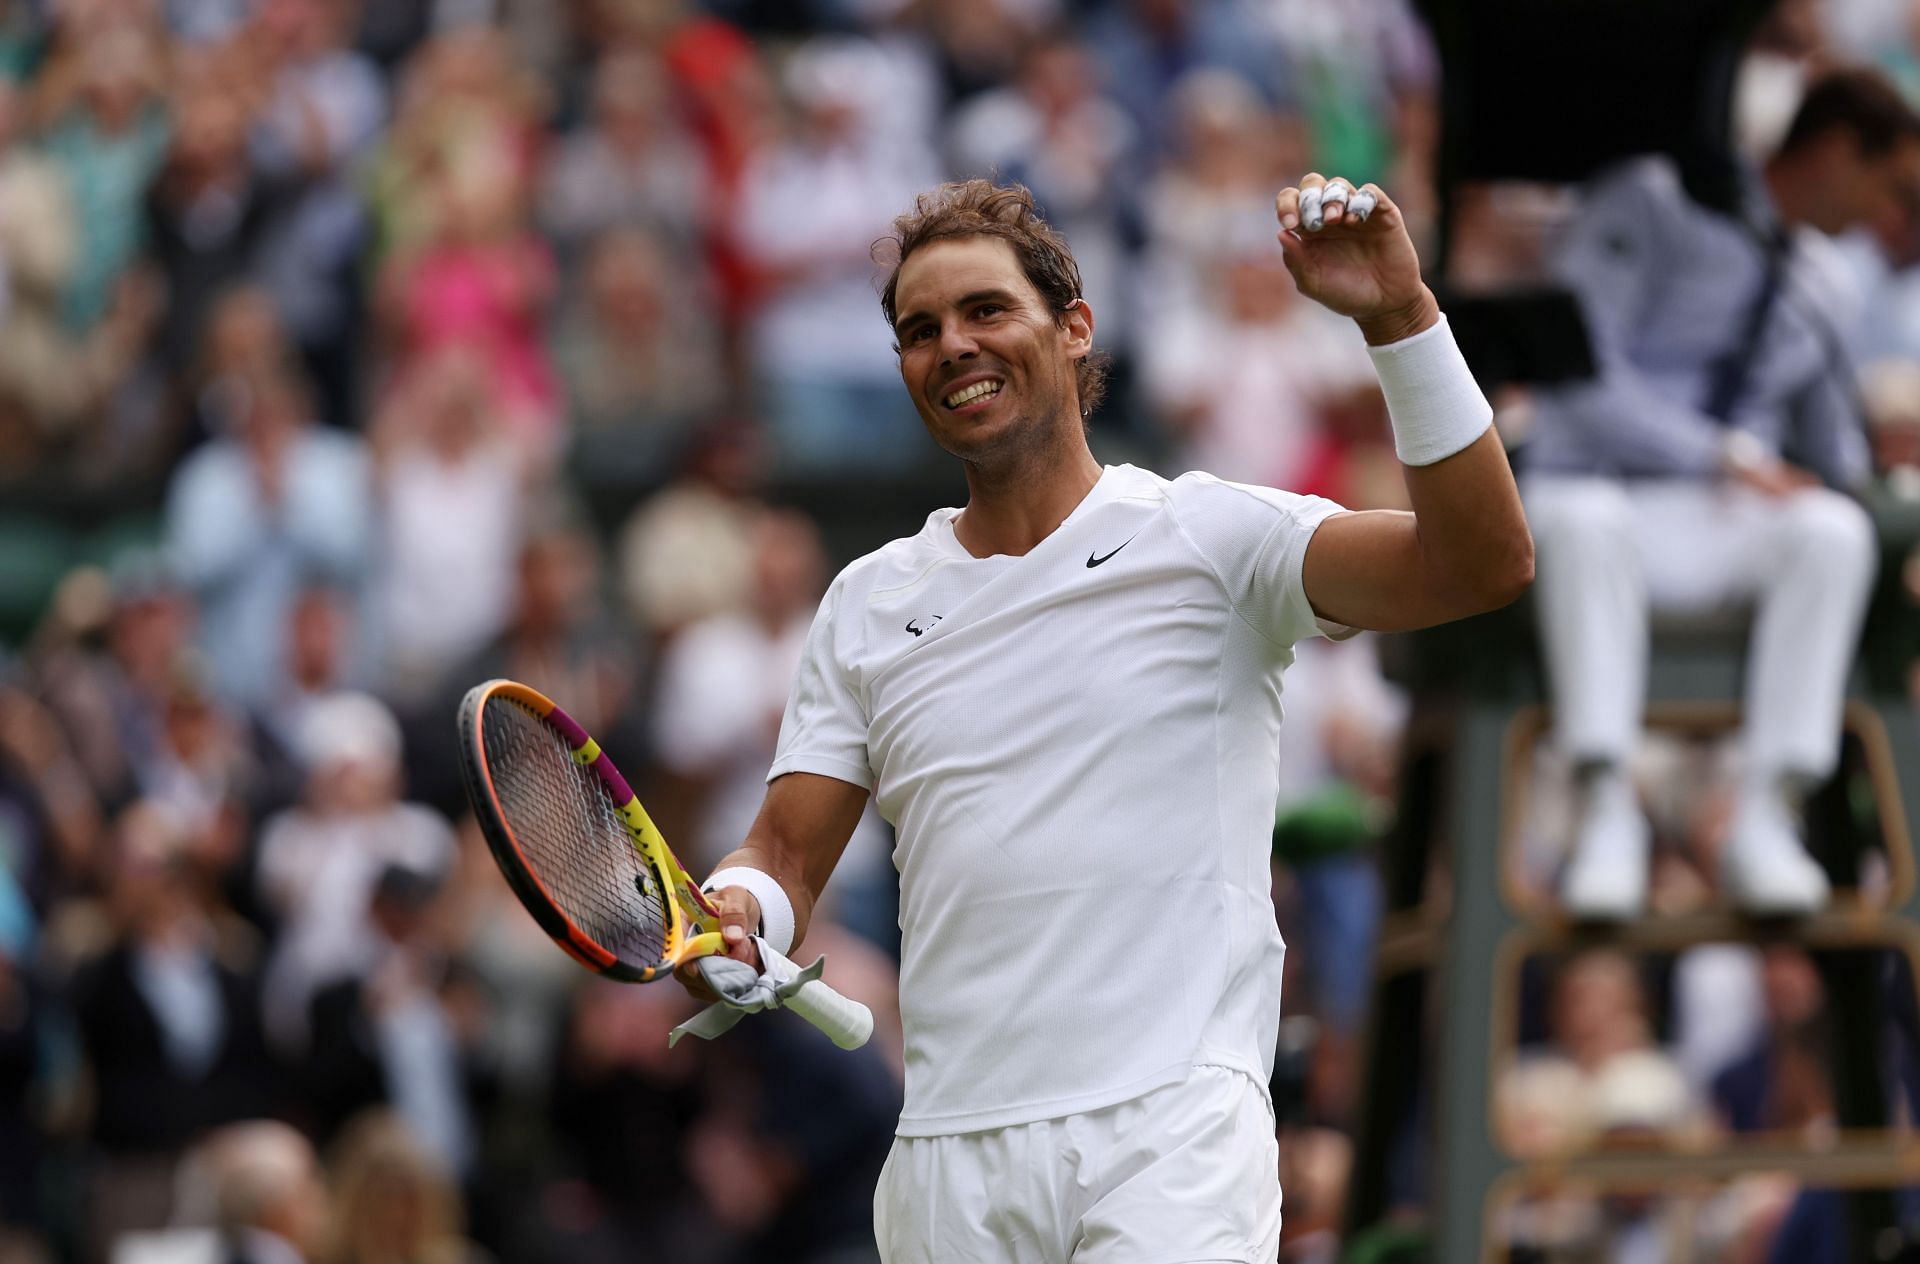 Rafael Nadal sealed his place in the second round of Wimbledon